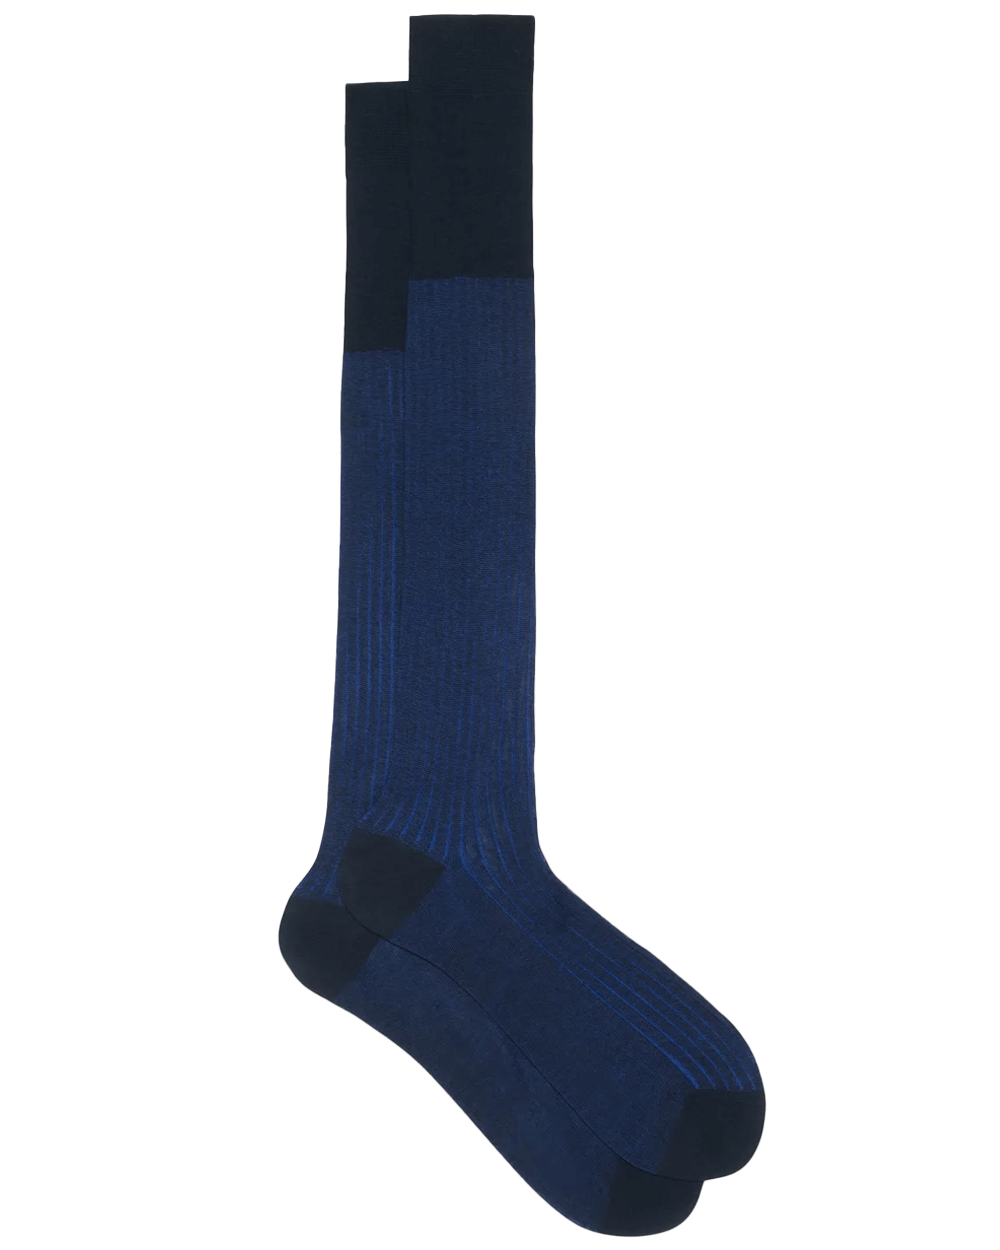 Vanisee Over the Calf Socks in Navy and Blue